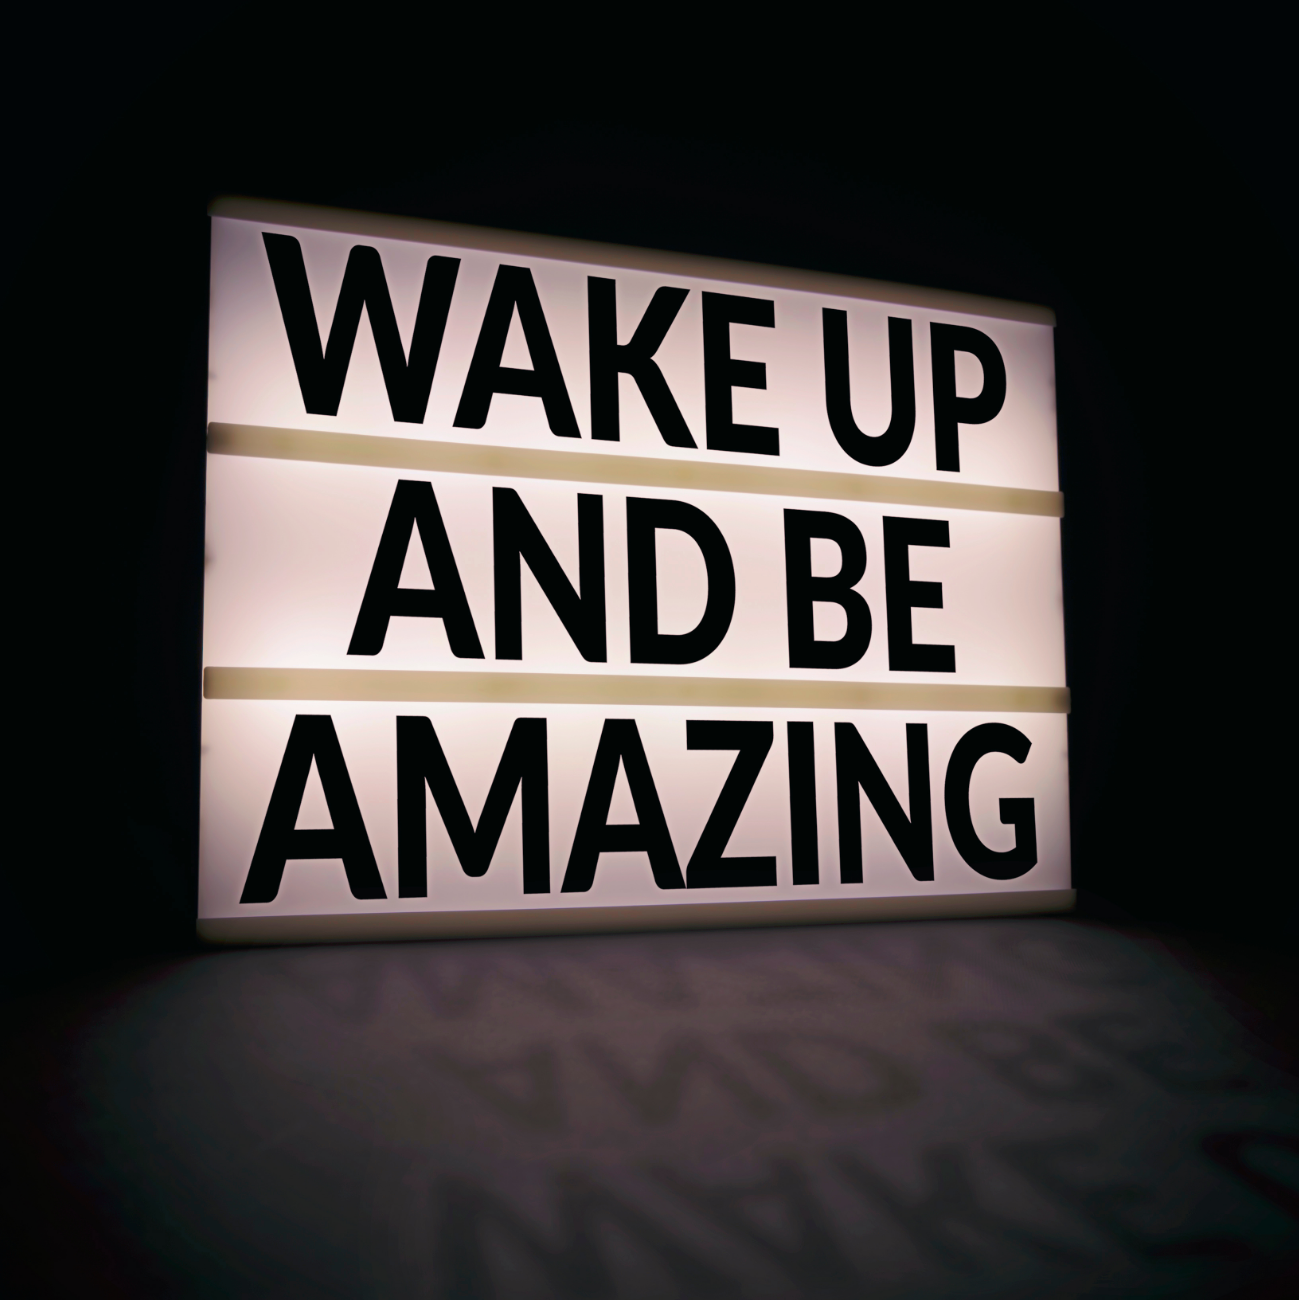 Freelance Content Writer, SEO Blog Specialist, Ghostwriter – squareONE
wake up and be amazing written on lighted sign 